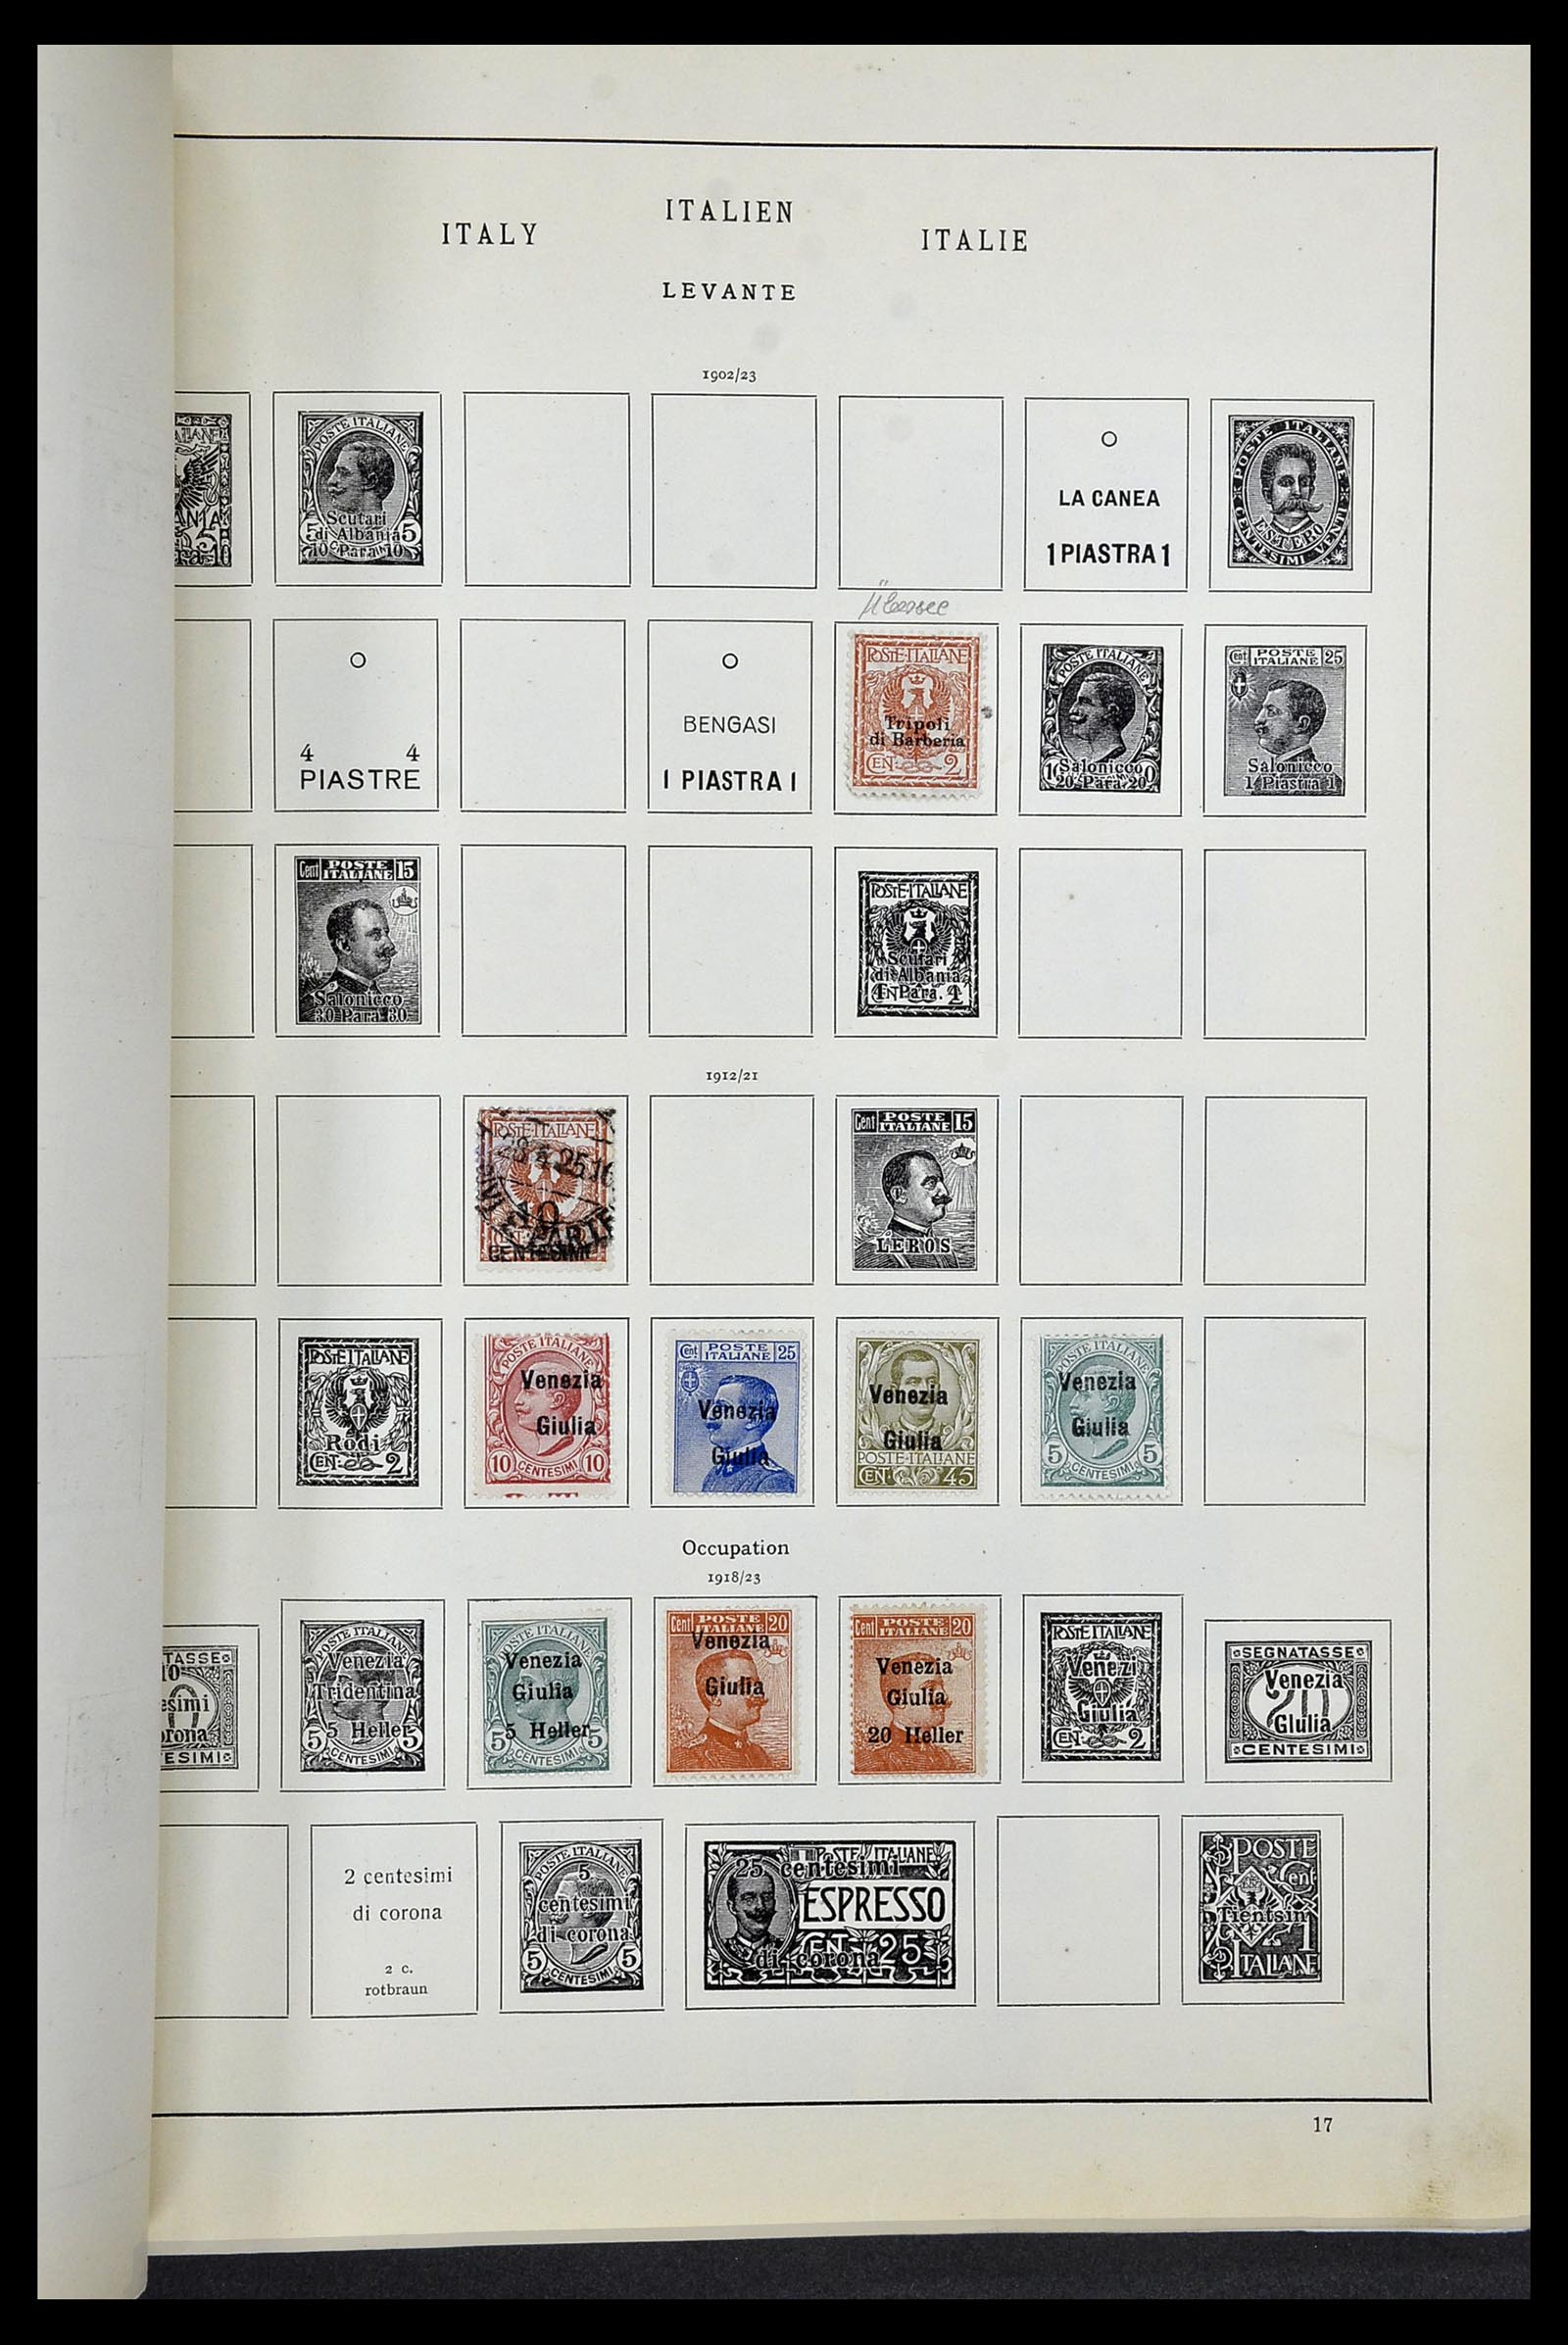 33619 019 - Stamp collection 33619 Italian territories/occupation/colonies 1874-1945